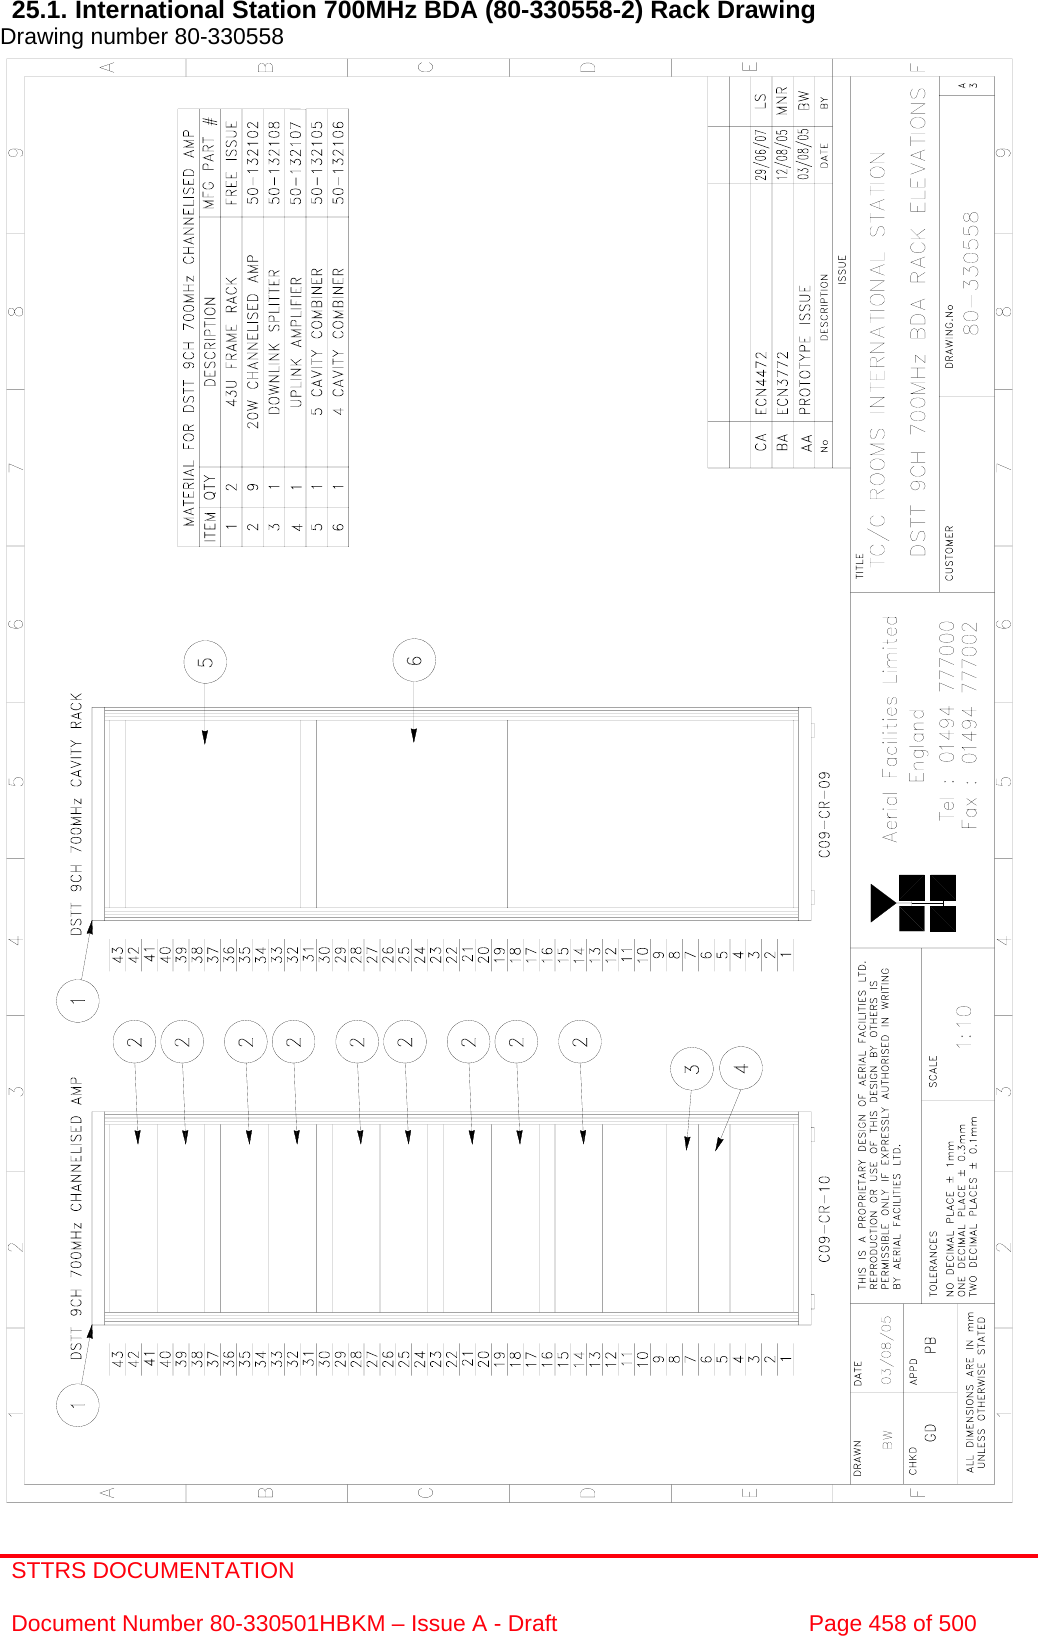 STTRS DOCUMENTATION  Document Number 80-330501HBKM – Issue A - Draft  Page 458 of 500   25.1. International Station 700MHz BDA (80-330558-2) Rack Drawing  Drawing number 80-330558                                                   